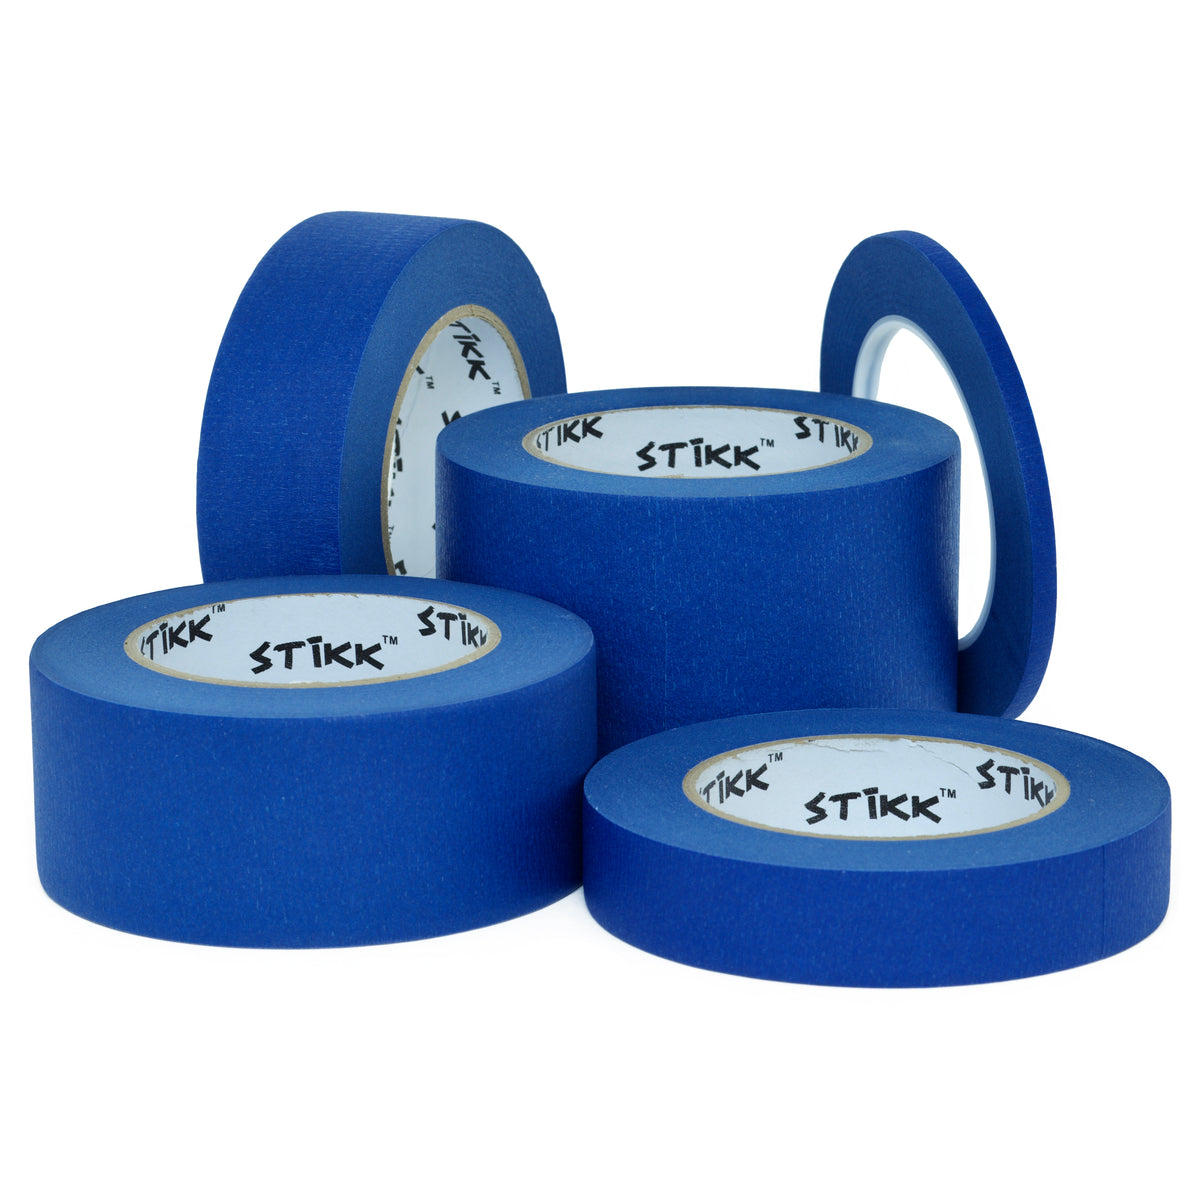  STIKK 3 Pack 1/4 Inch X 60yd Blue Painters Tape 14 Day Easy  Removal Trim Edge Thin Narrow Finishing Masking Tape